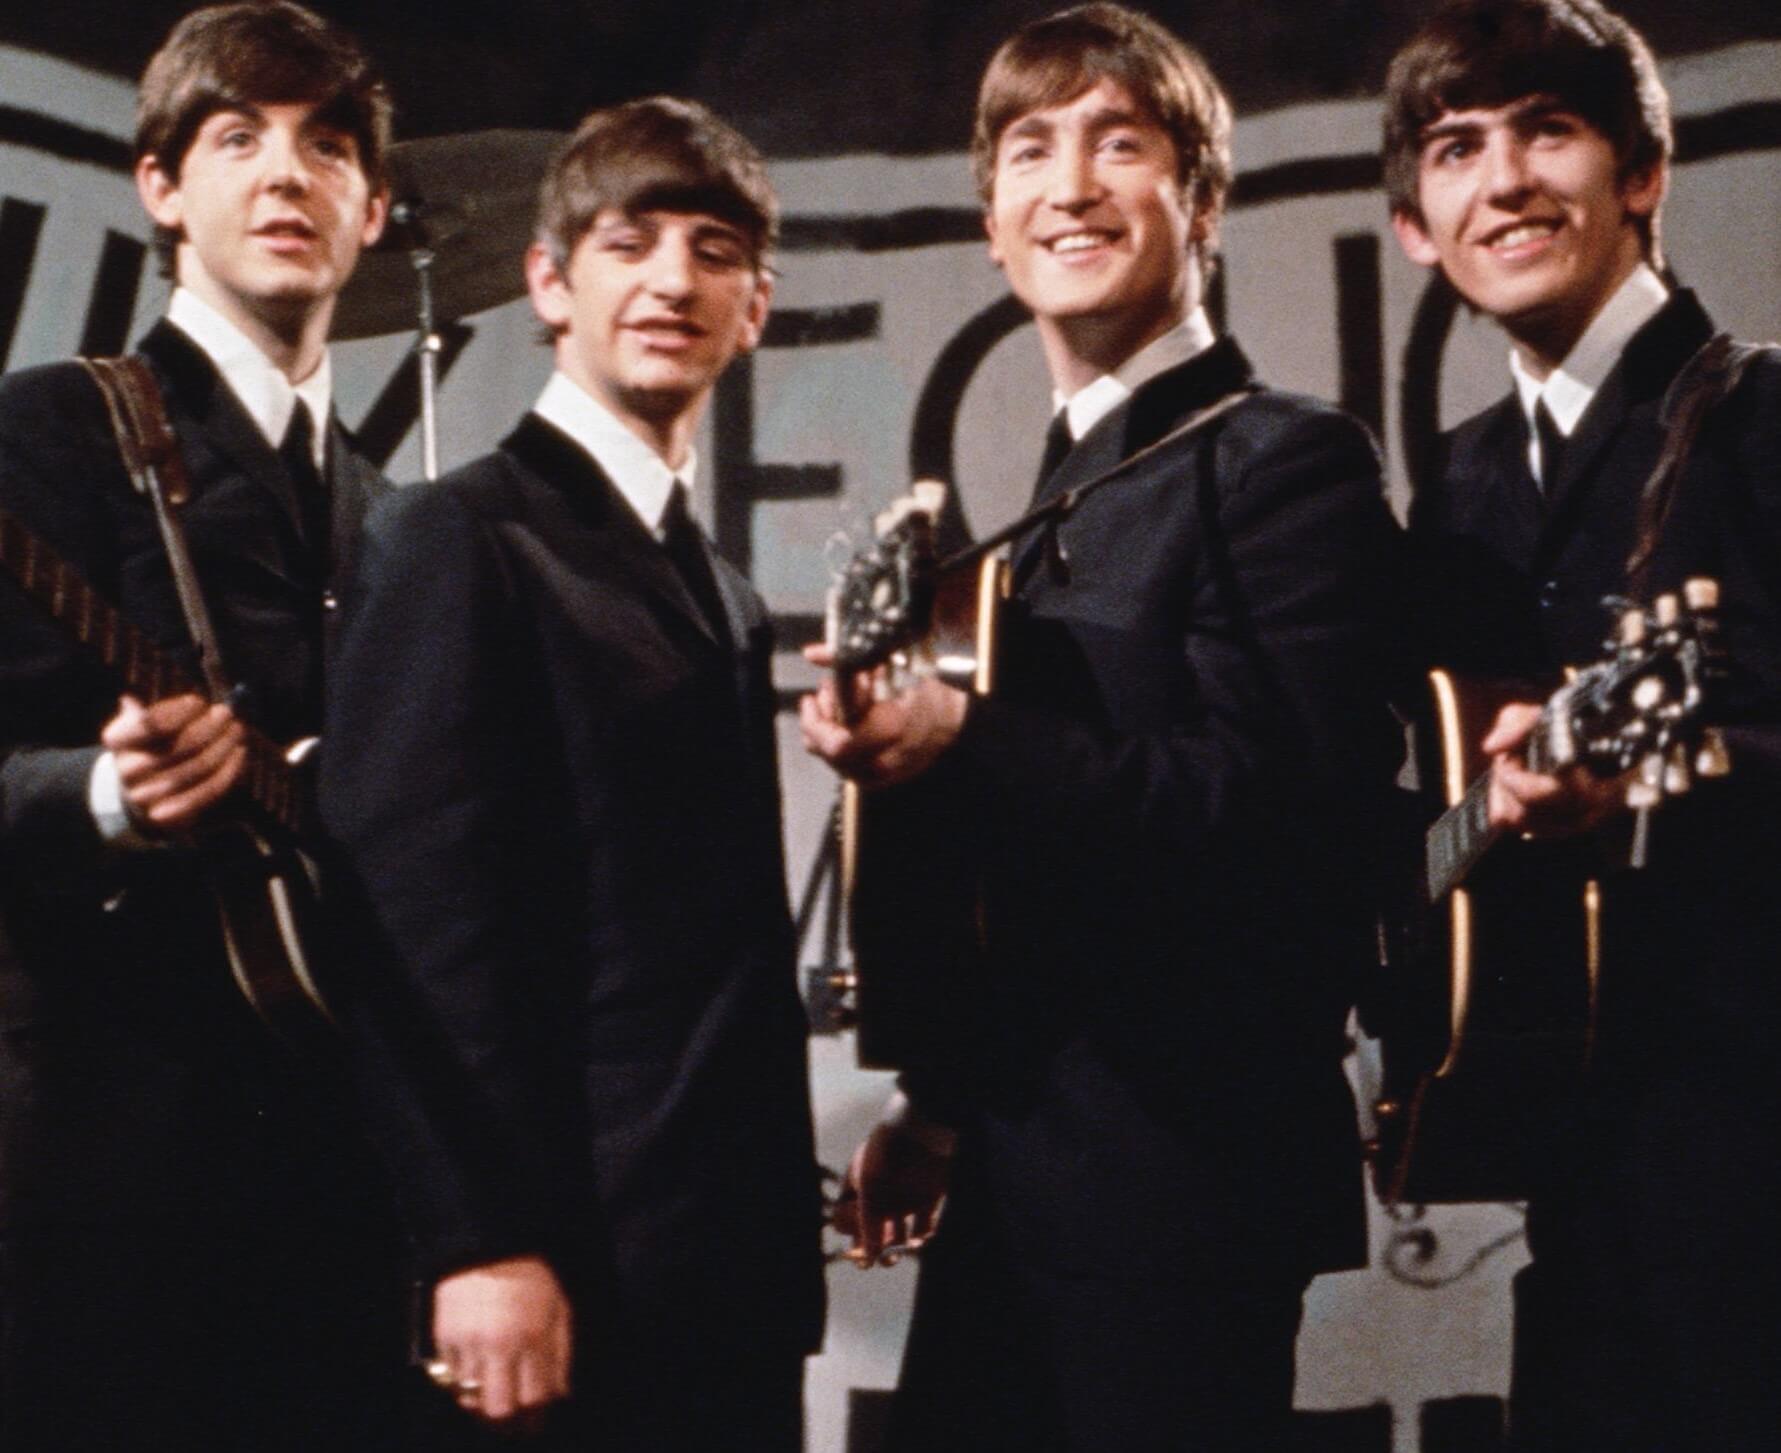 Why The Beatles' 'Now and Then' Includes a Snippet of 'Eleanor Rigby'